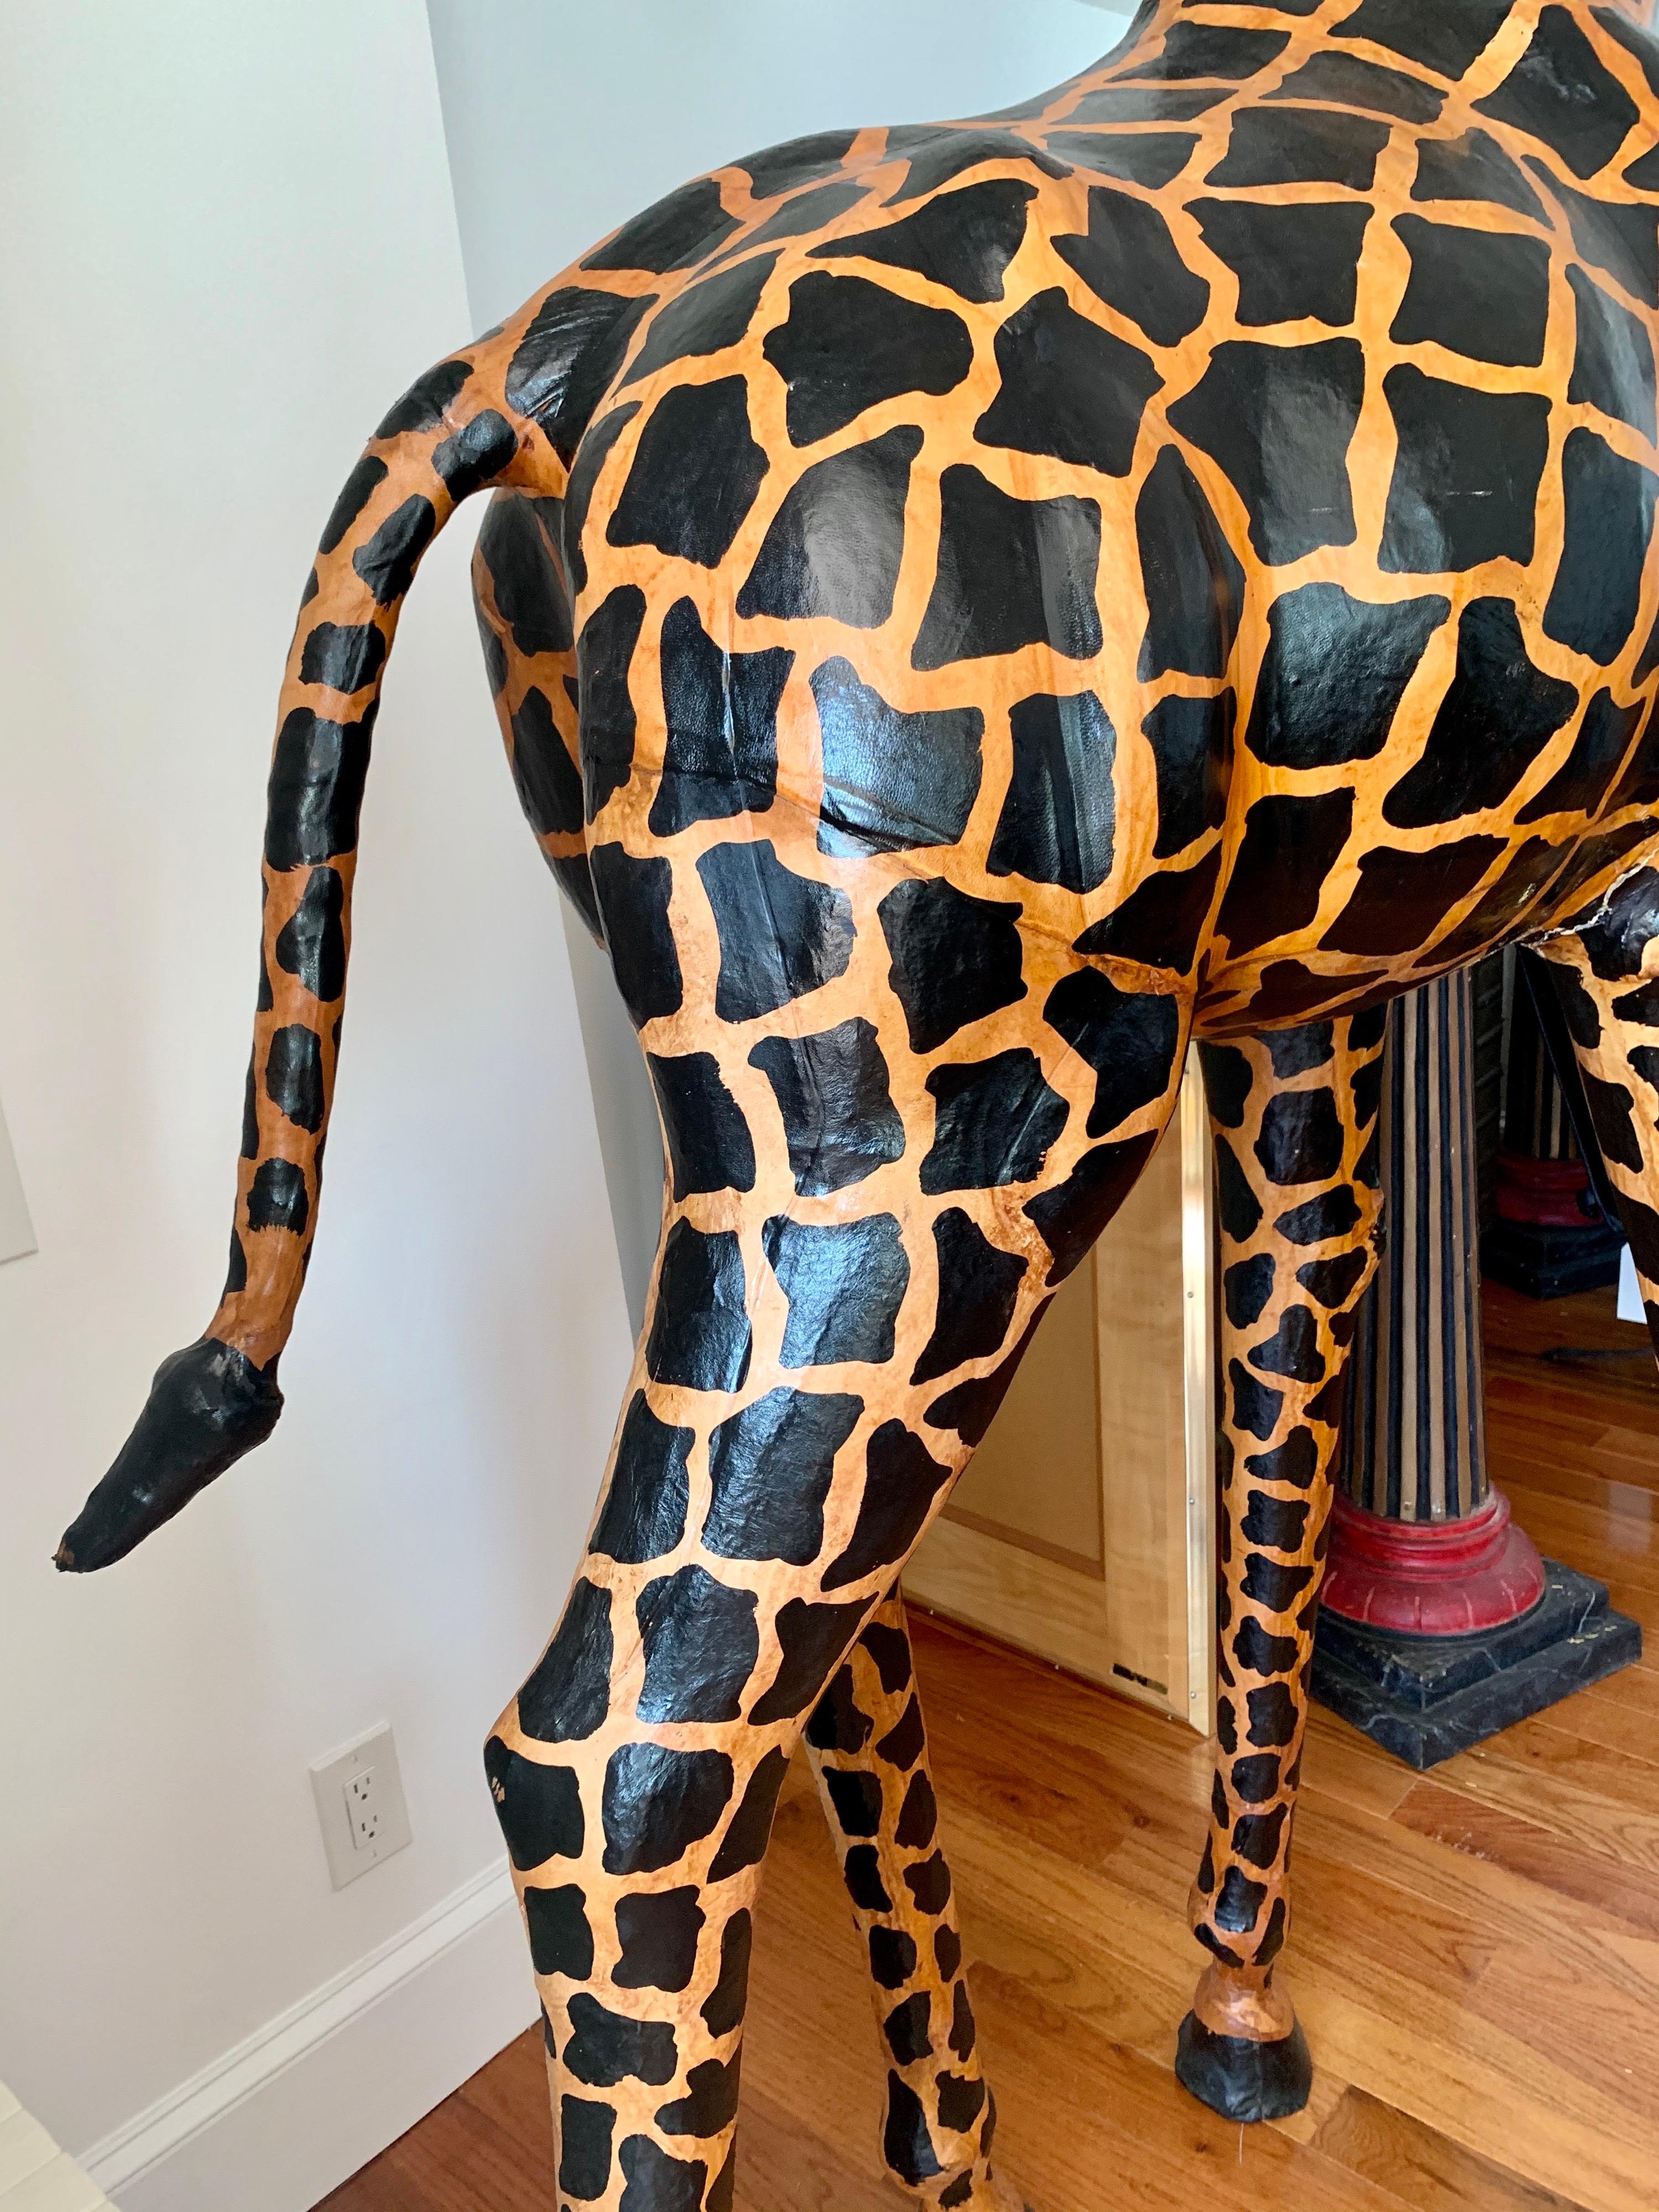 Large Life-Size Leather Giraffe Sculpture Almost Nine Feet Tall 4